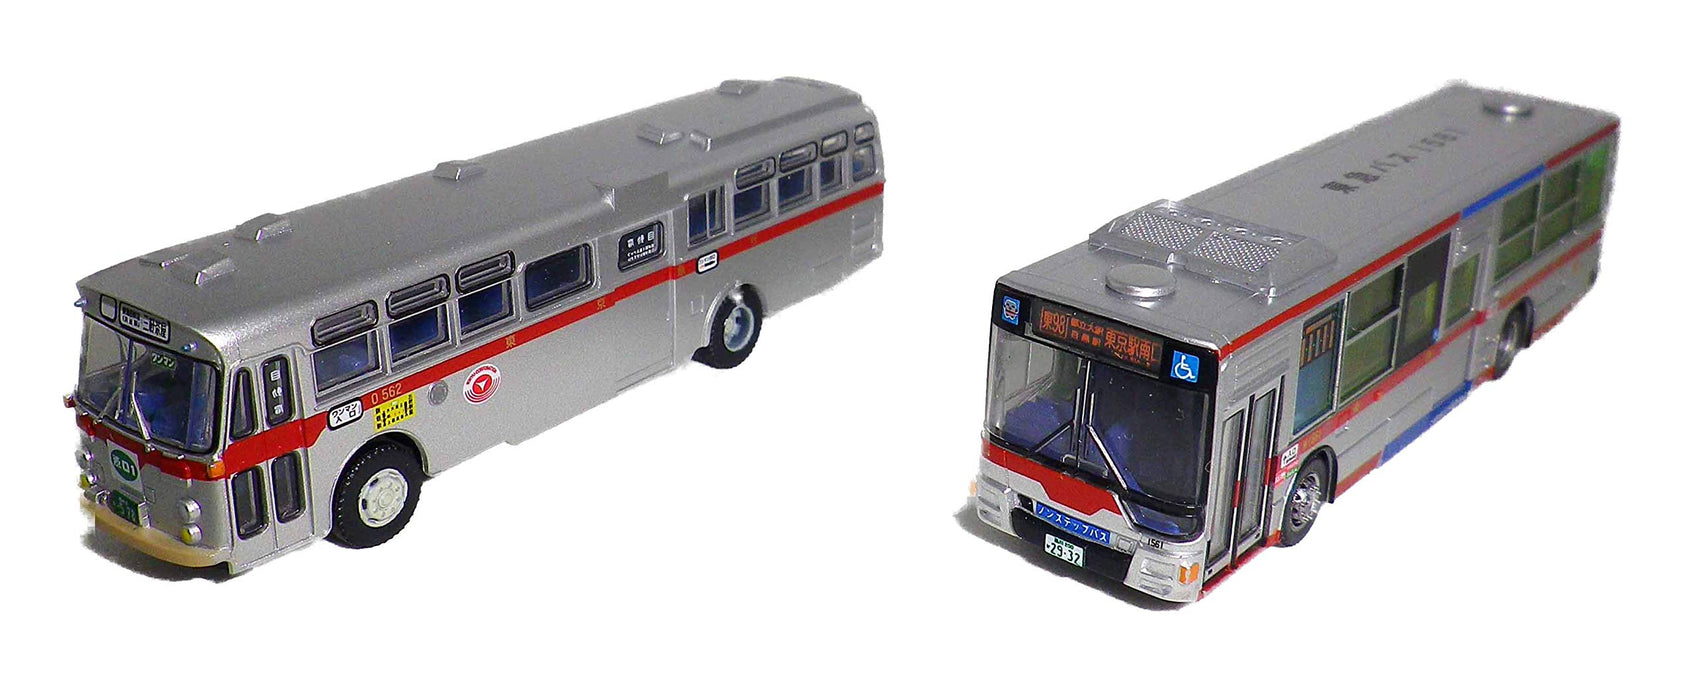 Tomytec Bus Collection - Original New and Old Long Car Set Tokyu Bus Edition